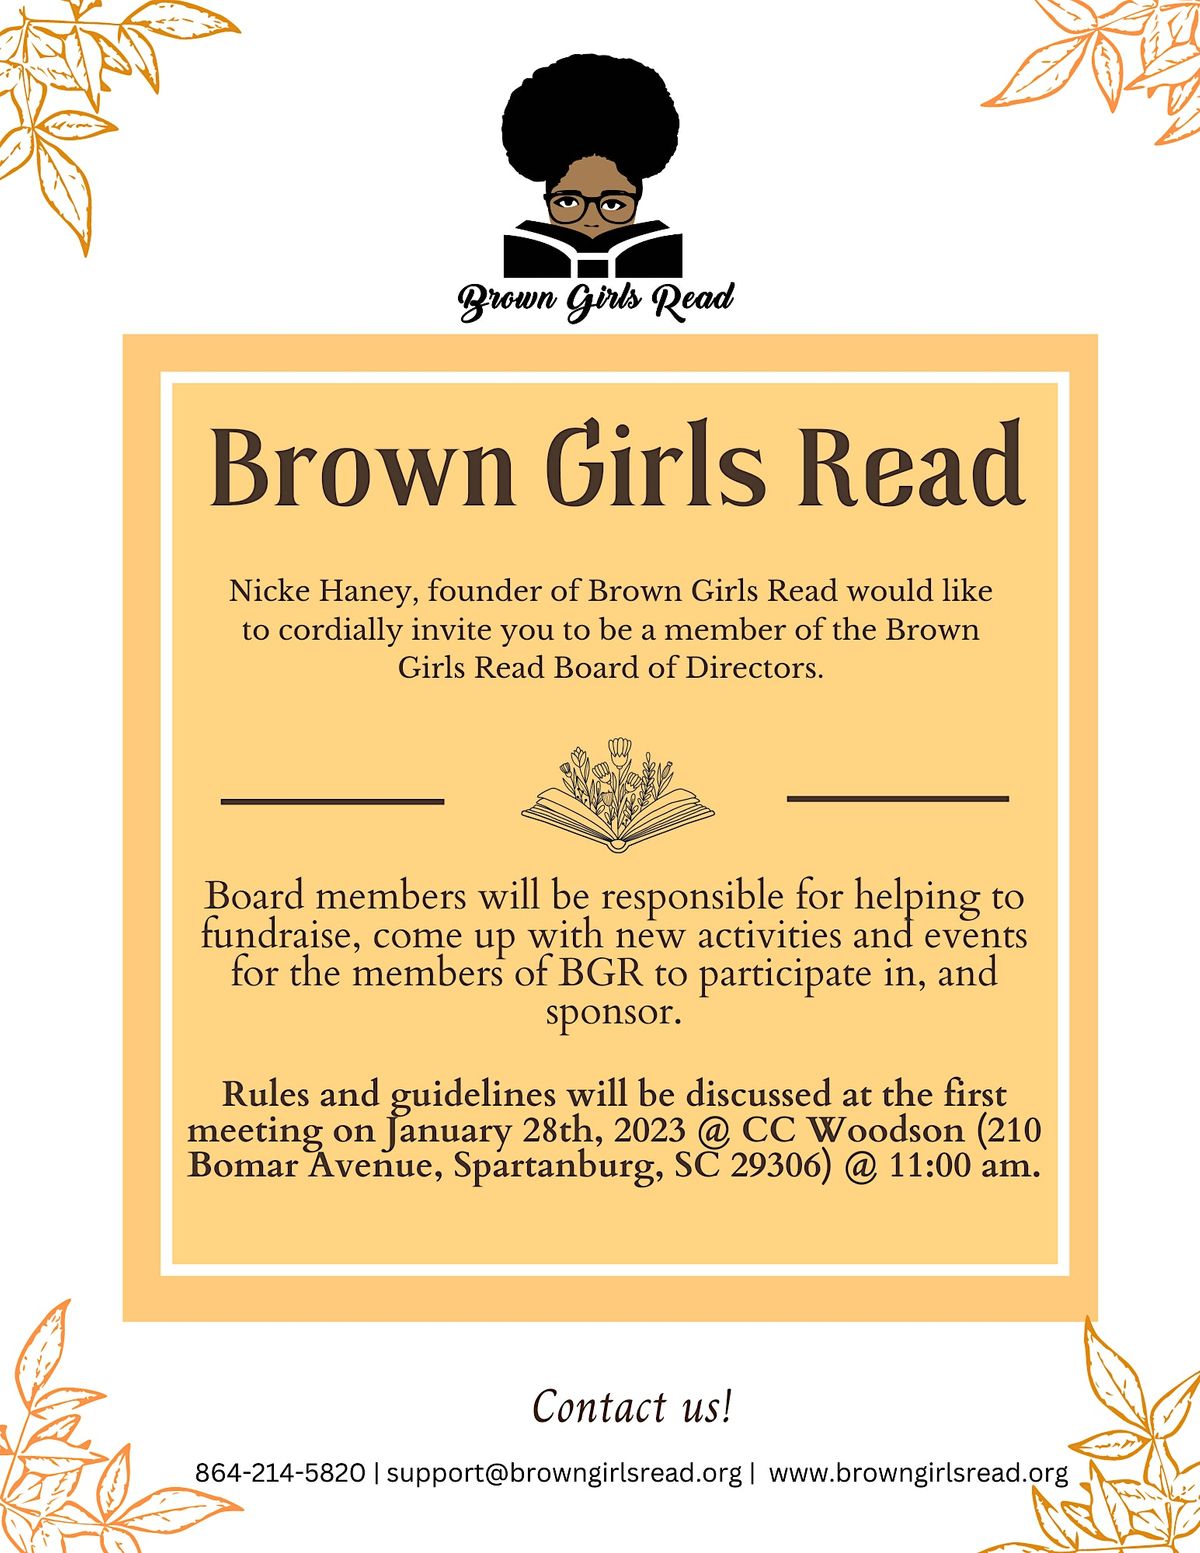 Brown Girls Read: "We All Dream in Color" Scholarship Pageant TICKETS